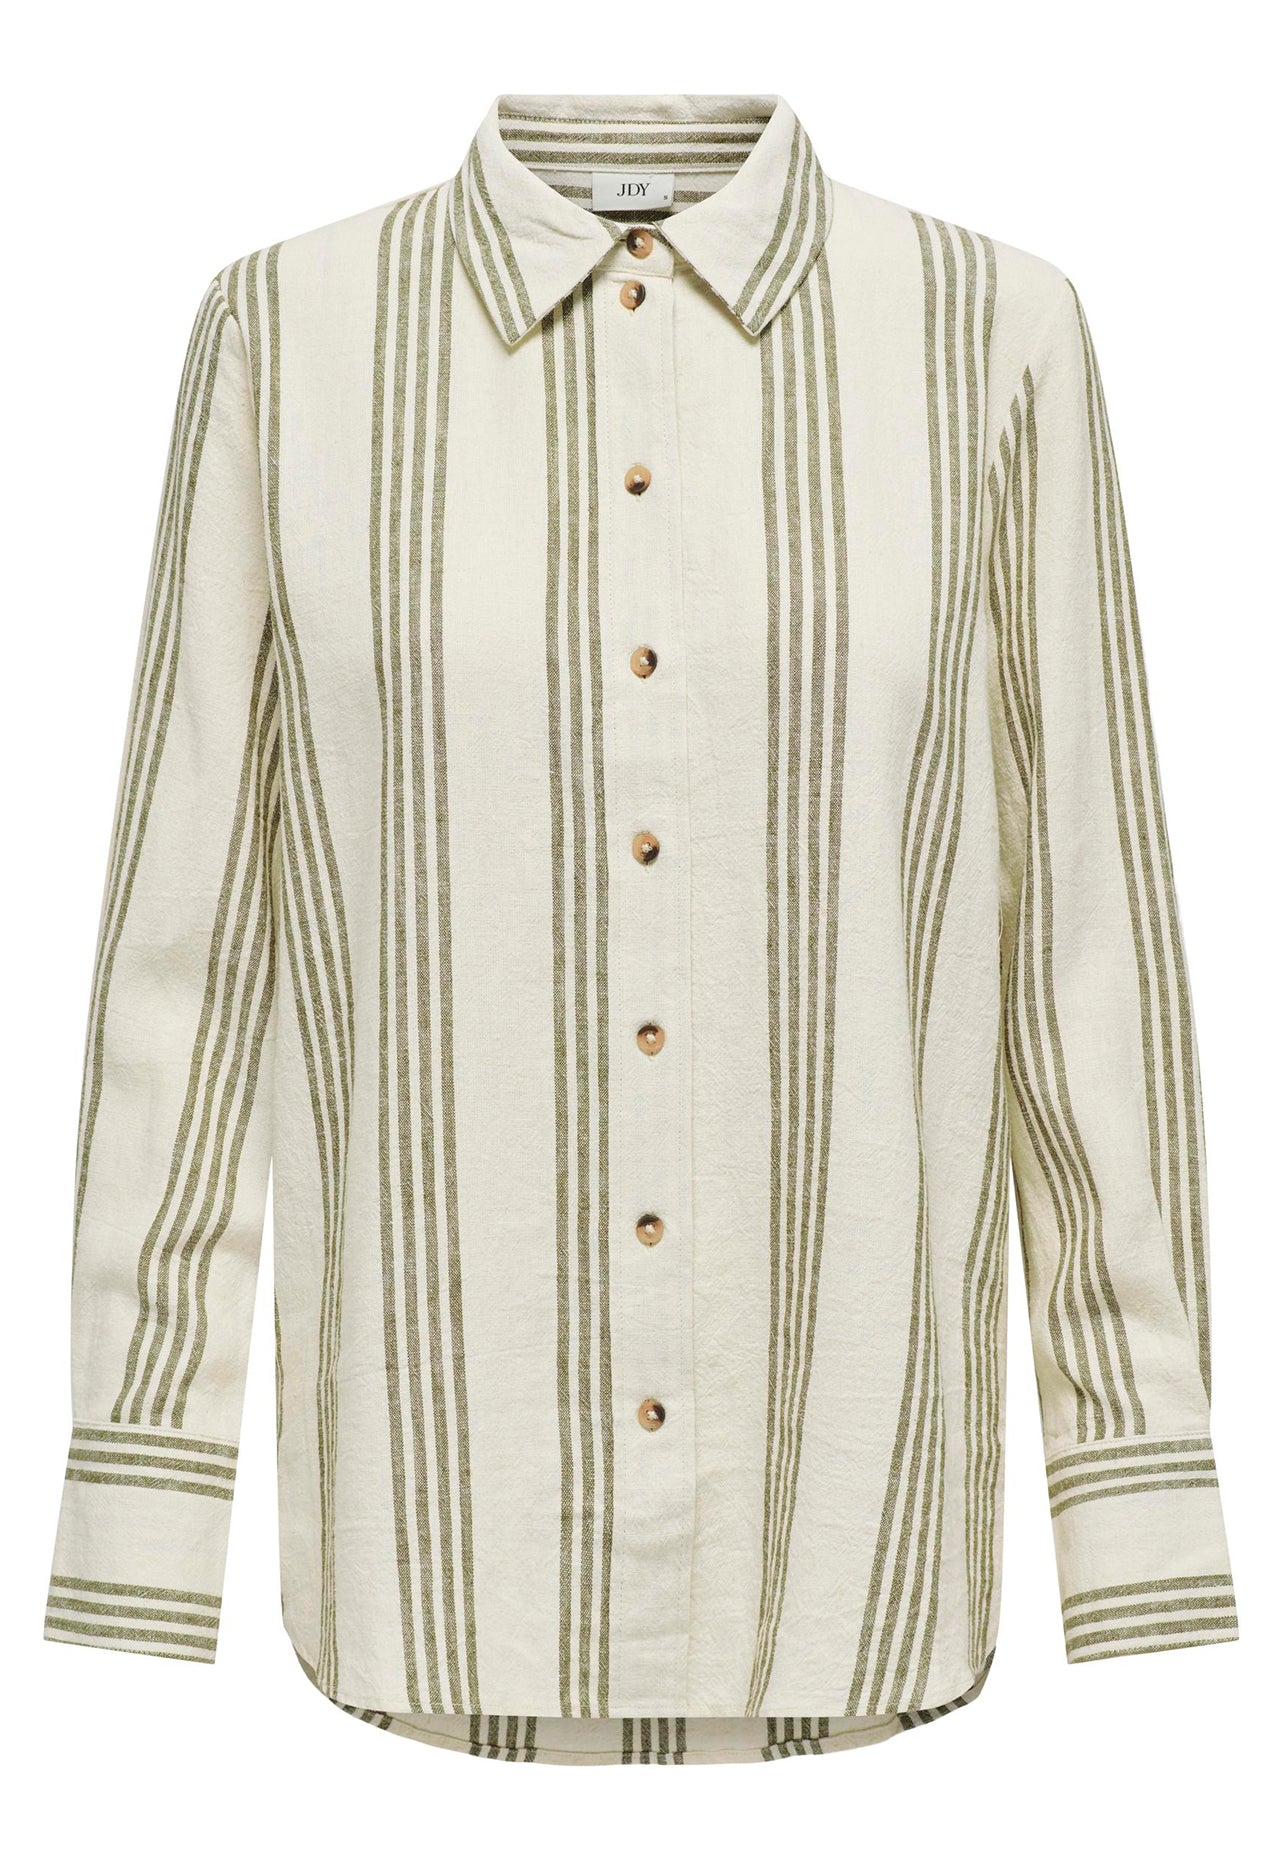 JDY Say Oversized Linen Stripe Co-ord Shirt in Beige & Olive Green - One Nation Clothing